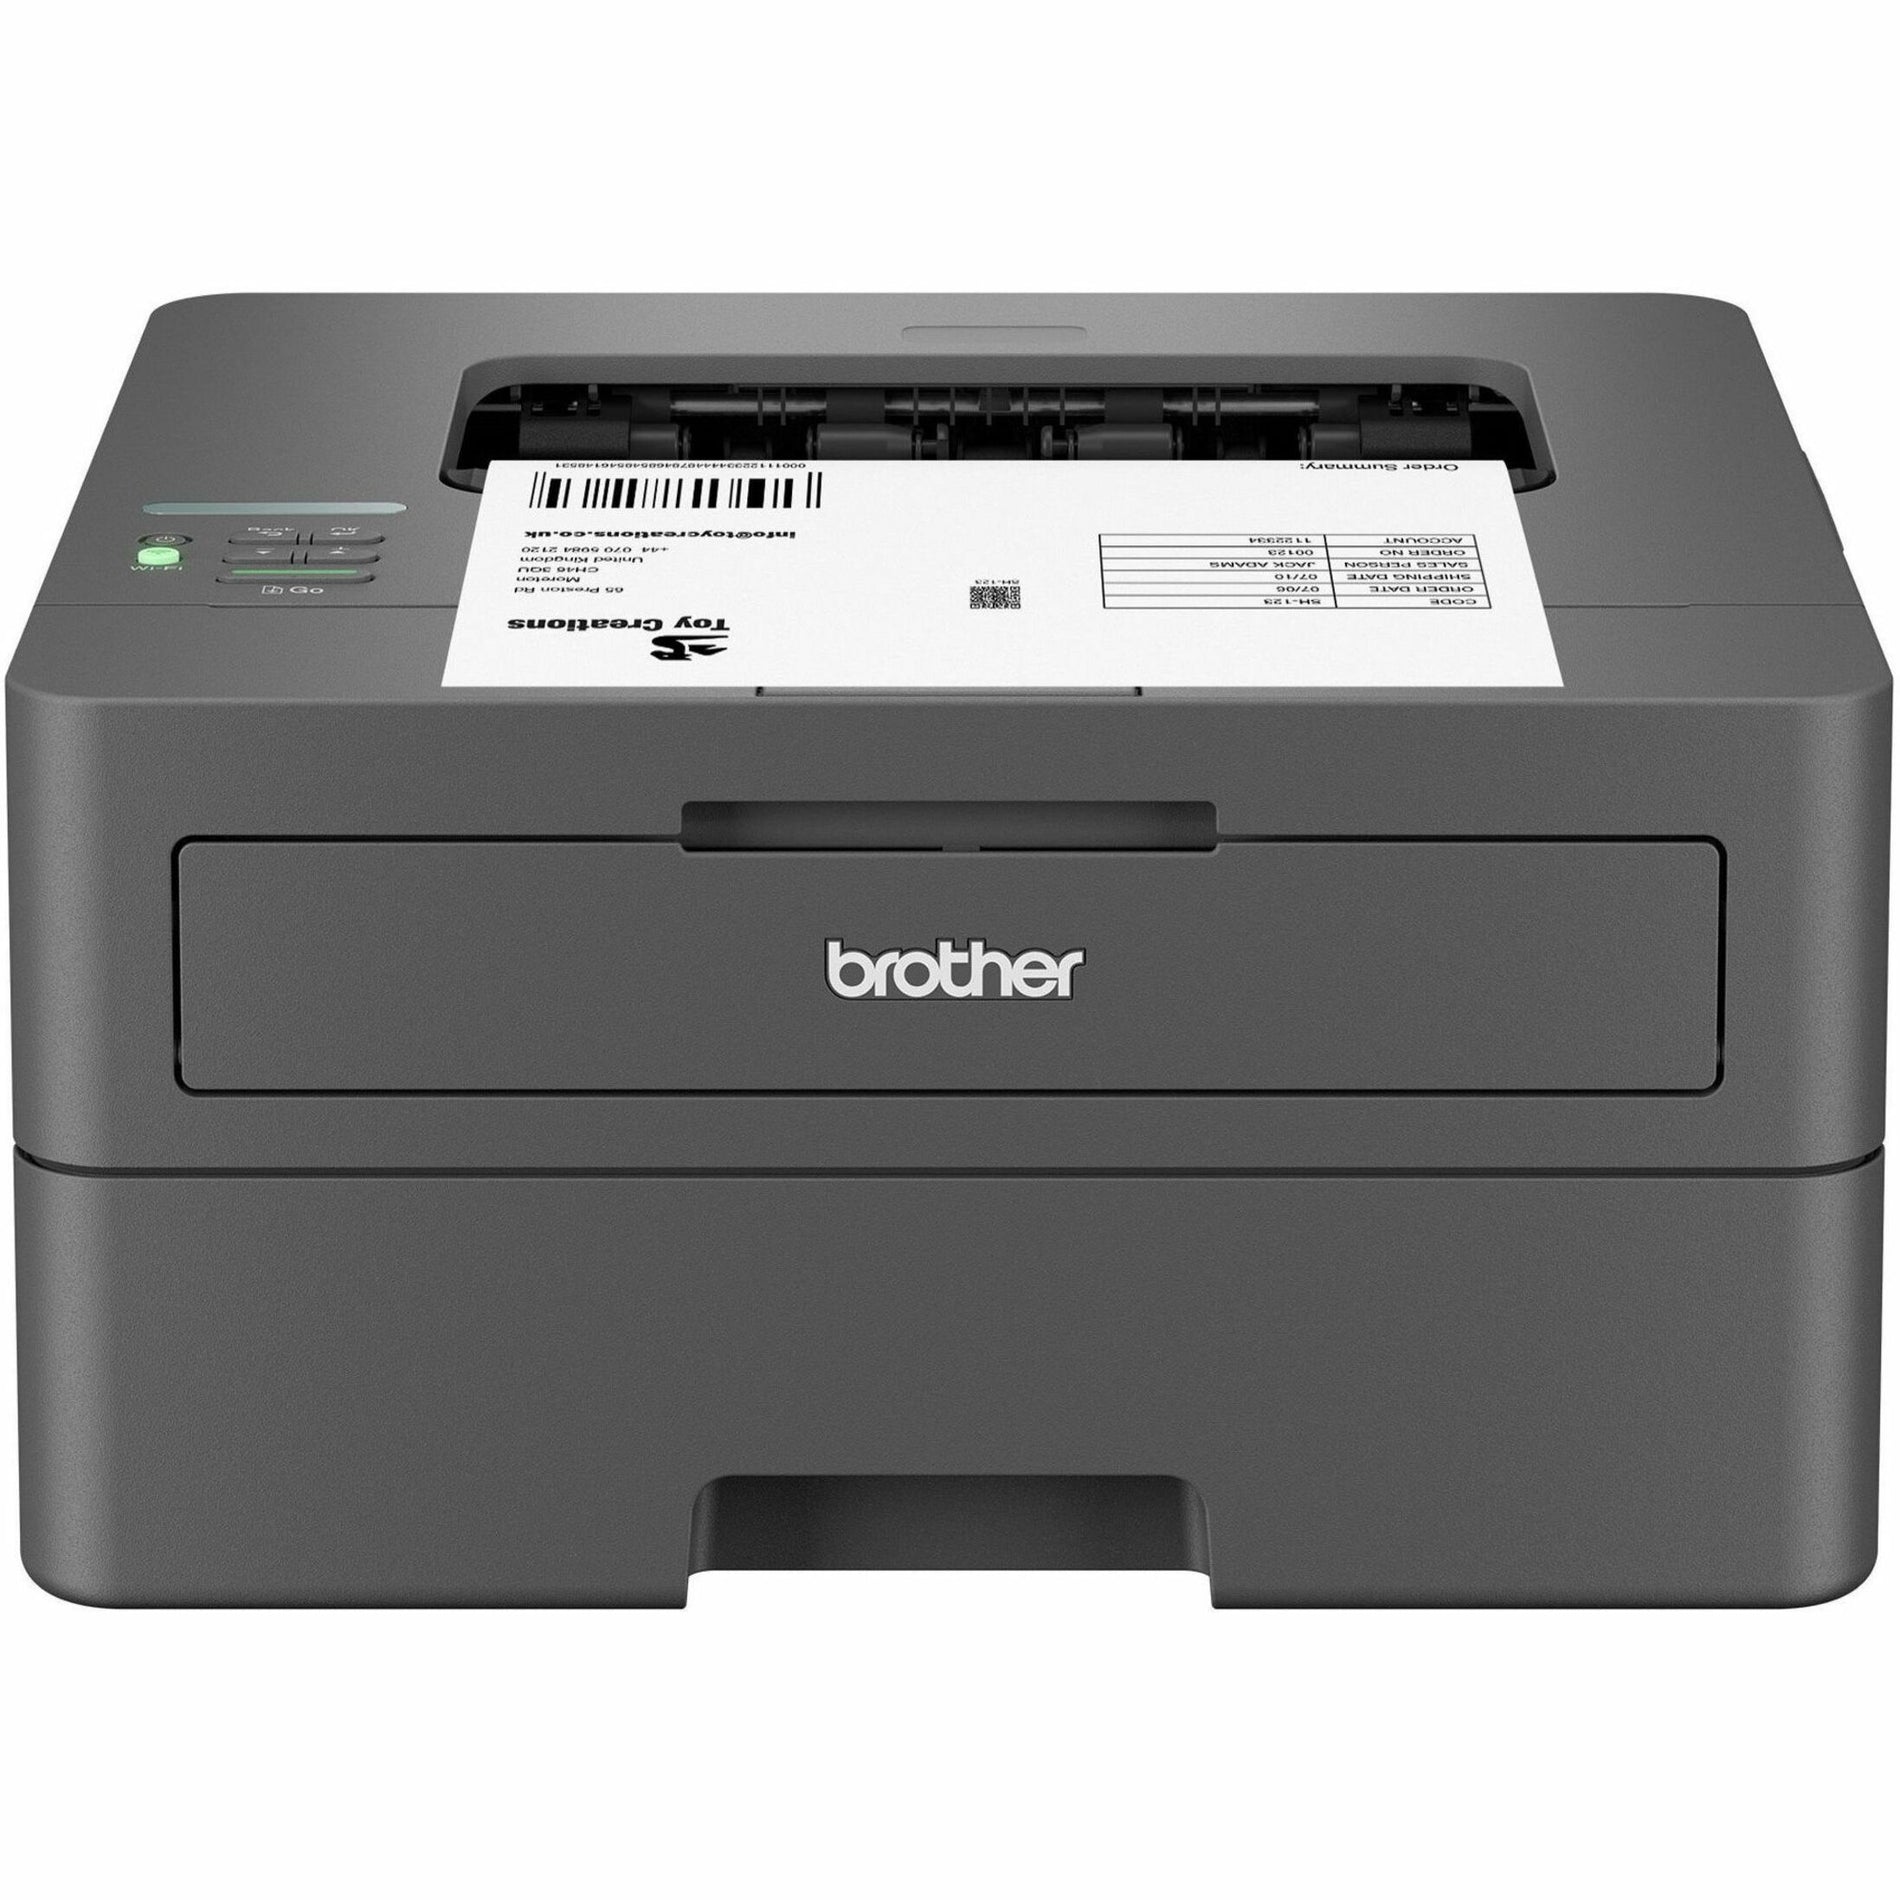 Brother HLL2405W Wireless HL-L2405W Compact Monochrome Laser Printer, Duty Cycle 35000, 2500 Monthly Print Volume